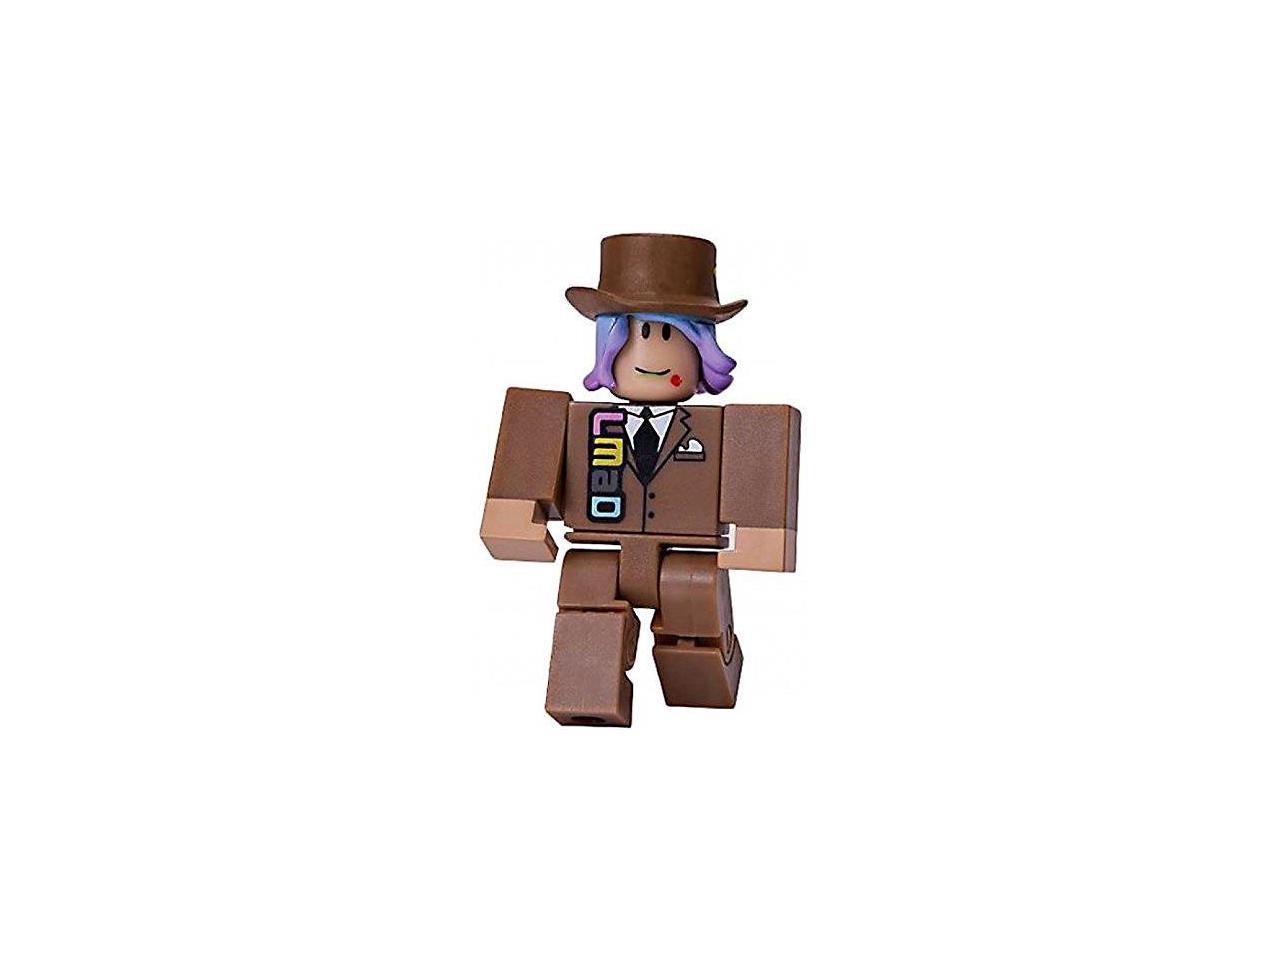 Roblox Series 1 Let S Make A Deal Action Figure Mystery Box Virtual Item Code 2 5 Newegg Com - roblox toys let's make a deal